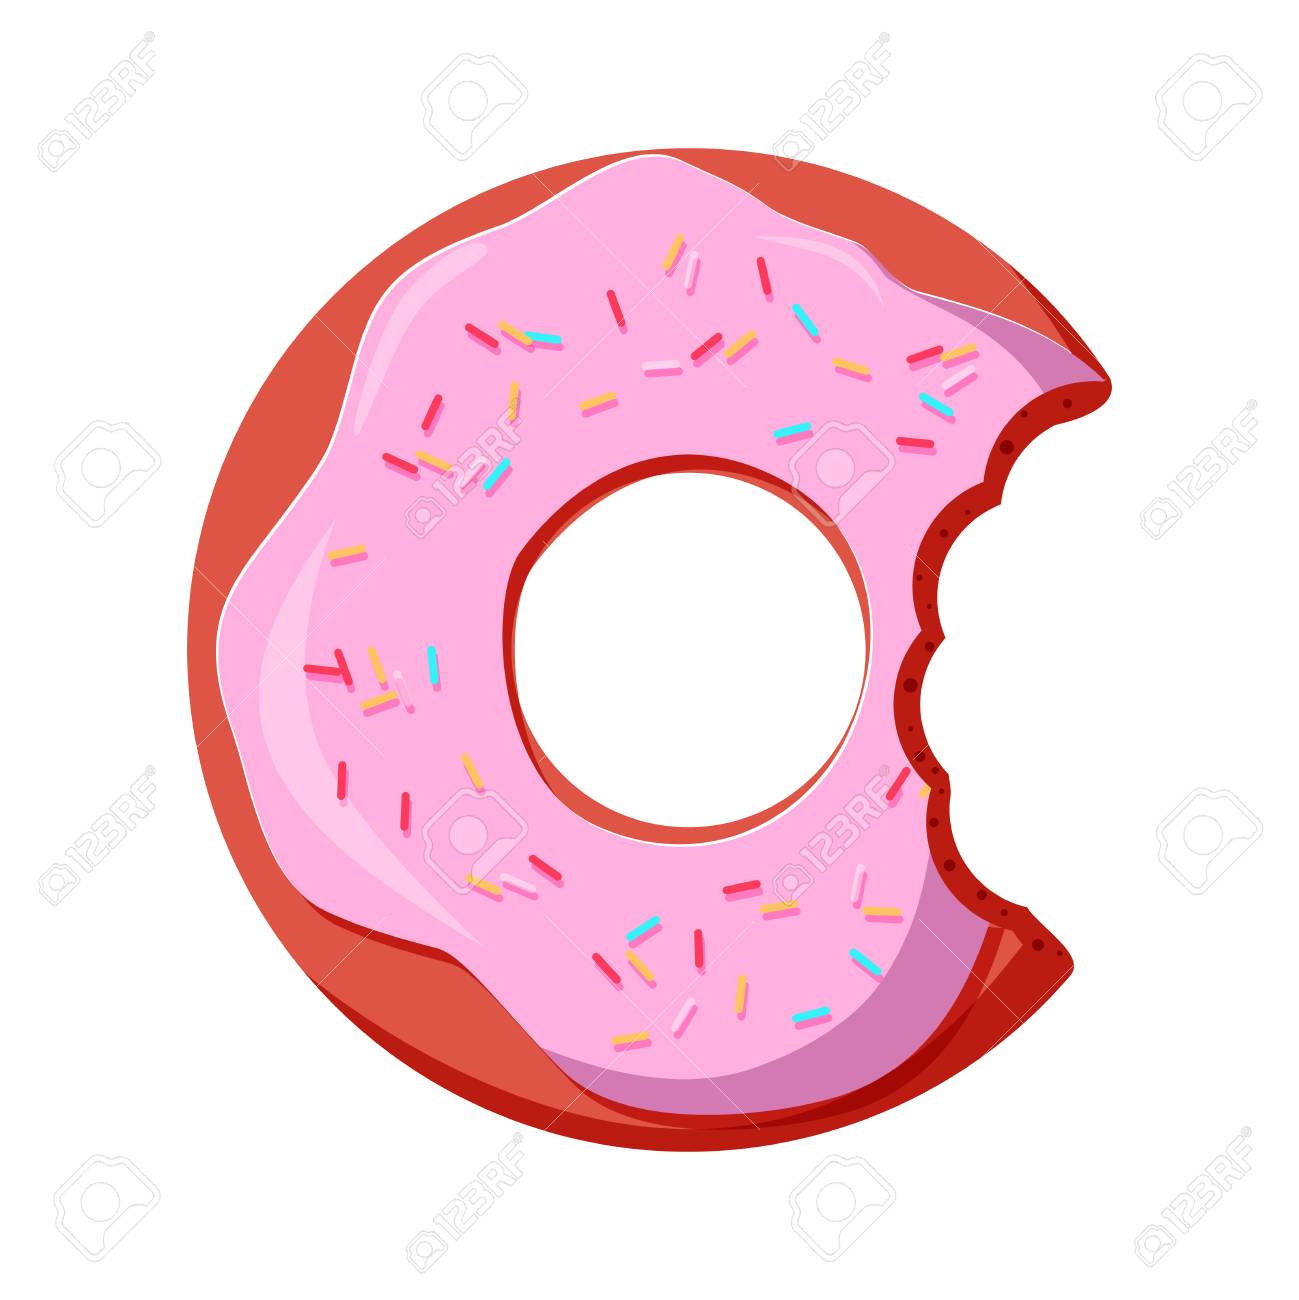 Donut With A Mouth Bite Isolated On White Background Vector